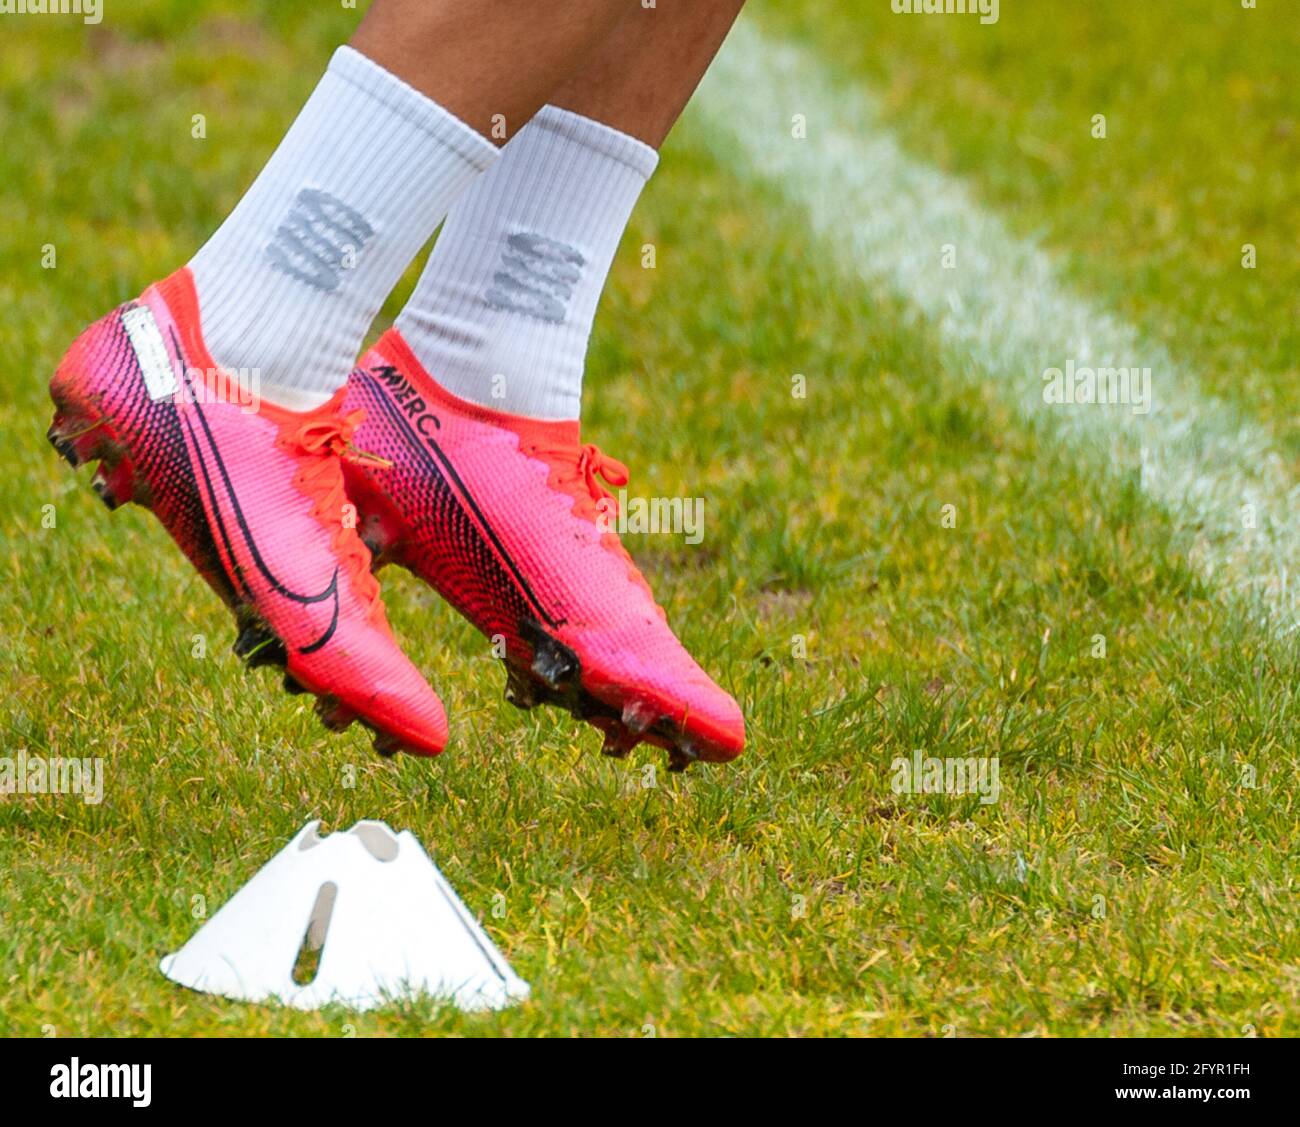 Nike Mercurial High Resolution Stock Photography and Images - Alamy